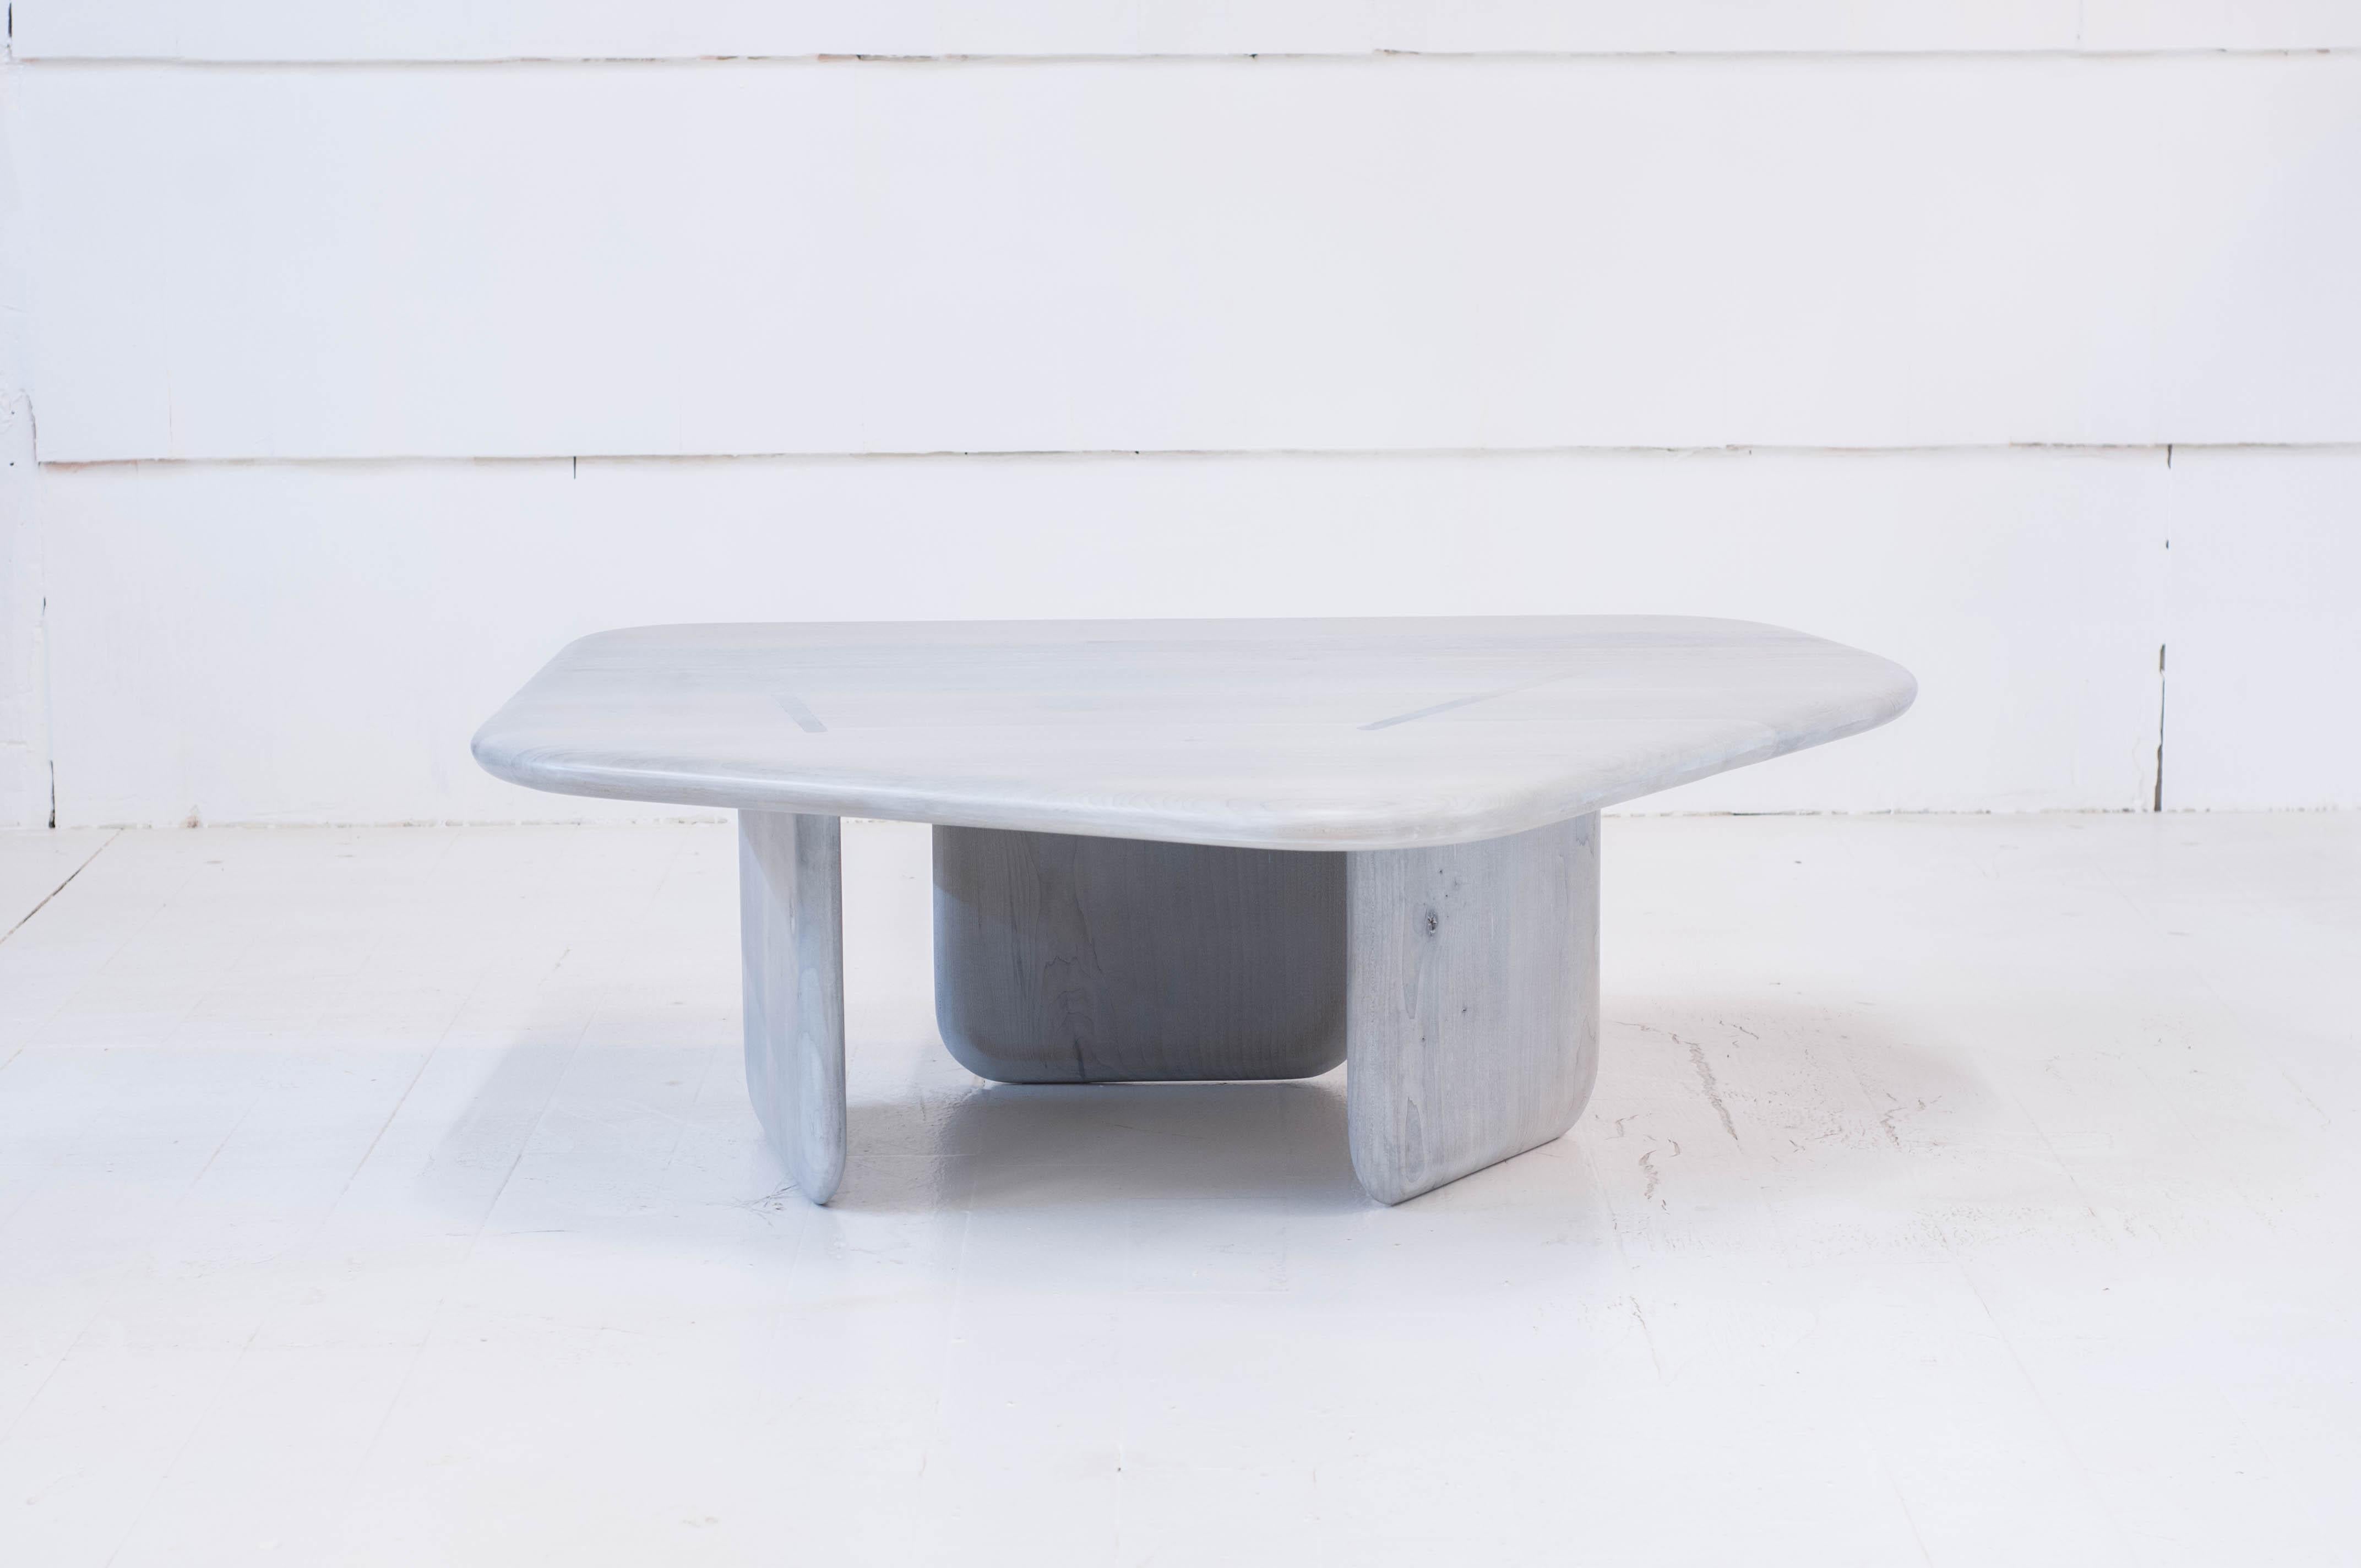 Canadian Dolmen Low Table in Stonewash Maple